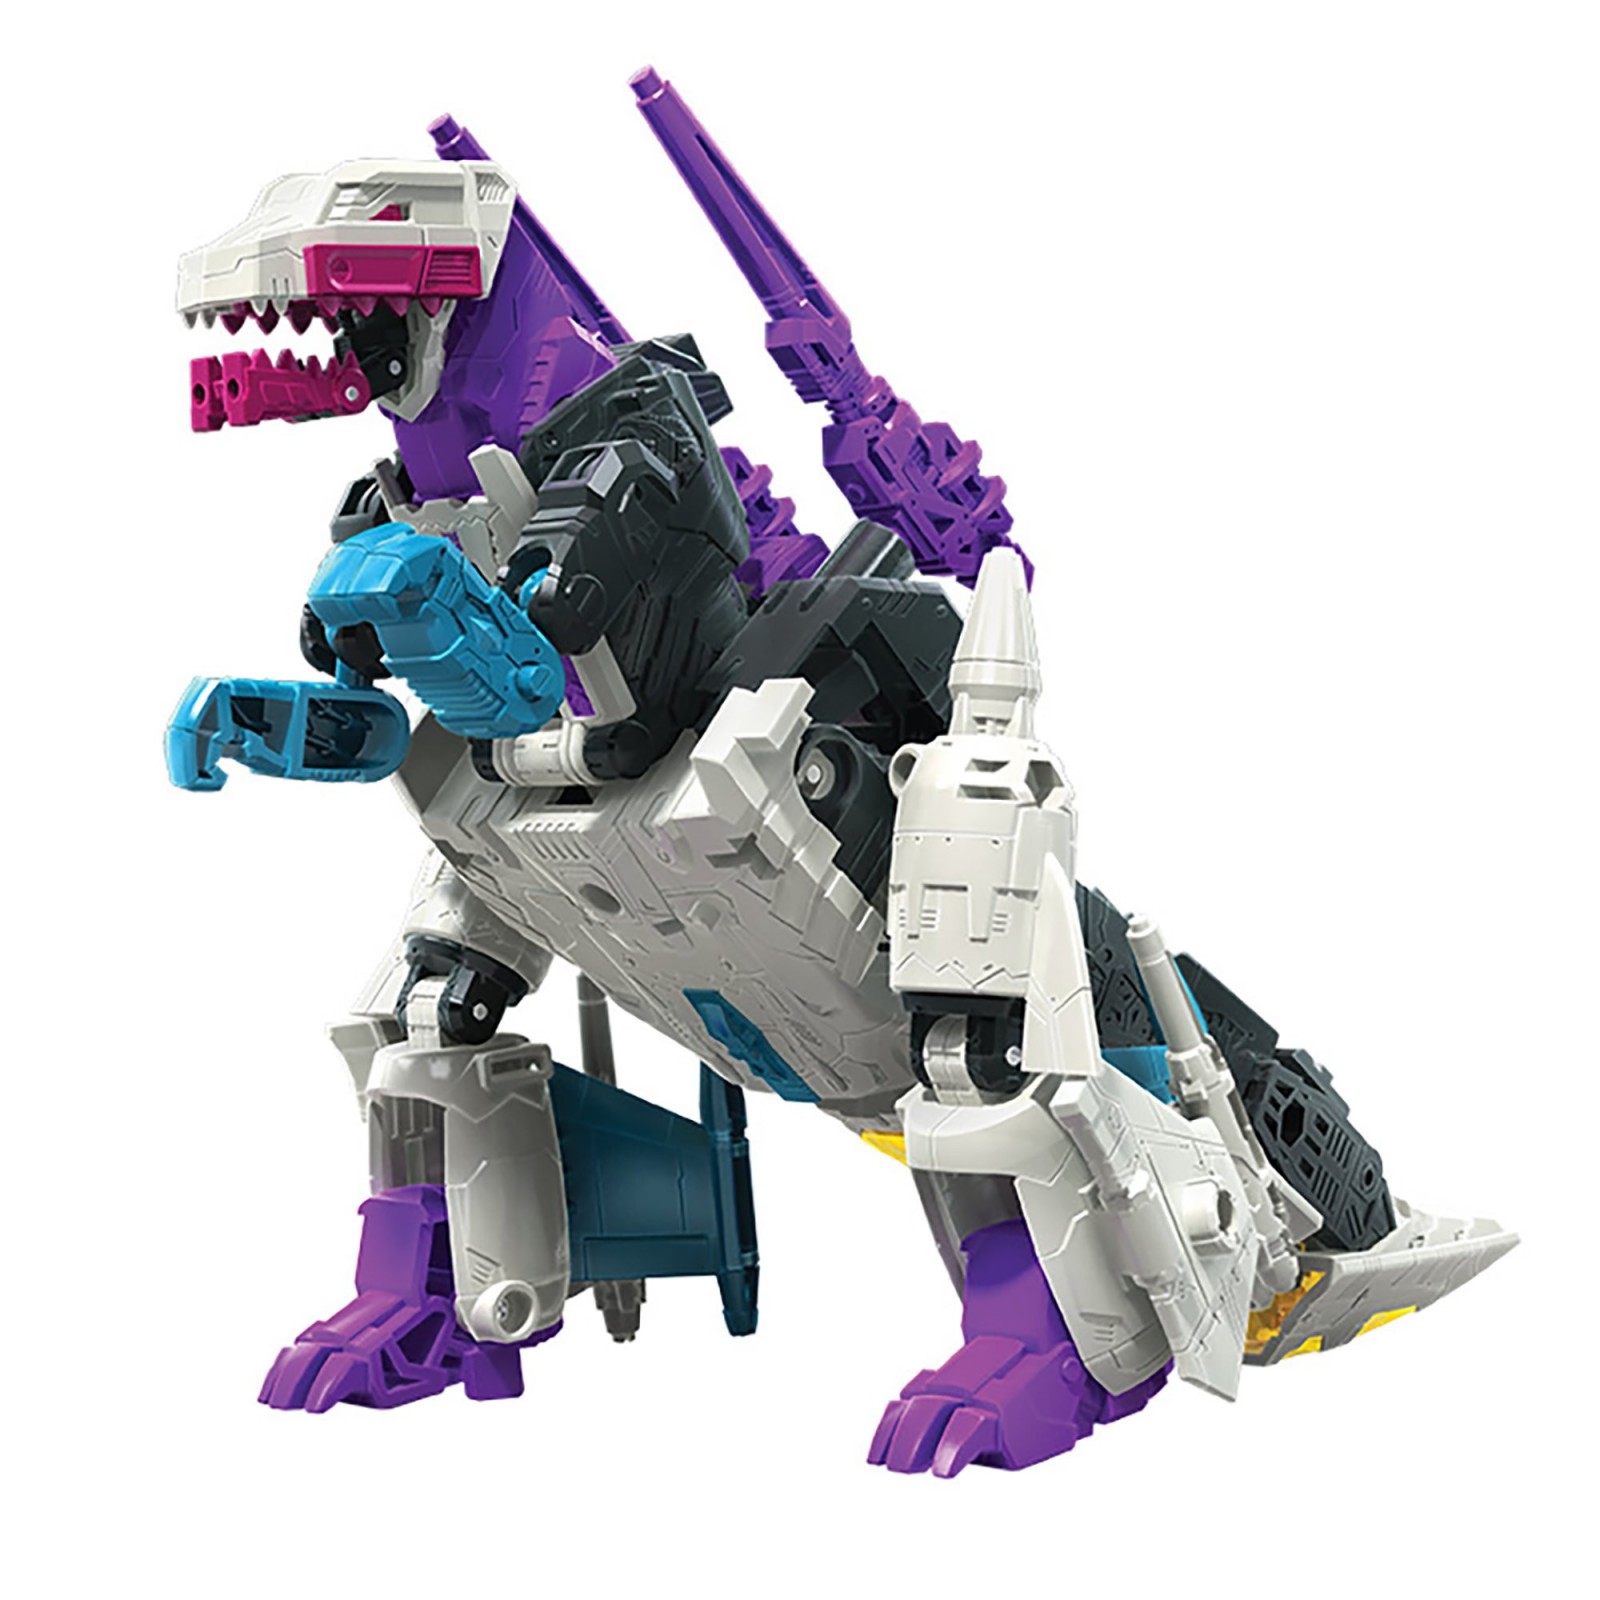 Transformers News: Steal of a Deal: Select Figures on Sale at Target for 50% Off!